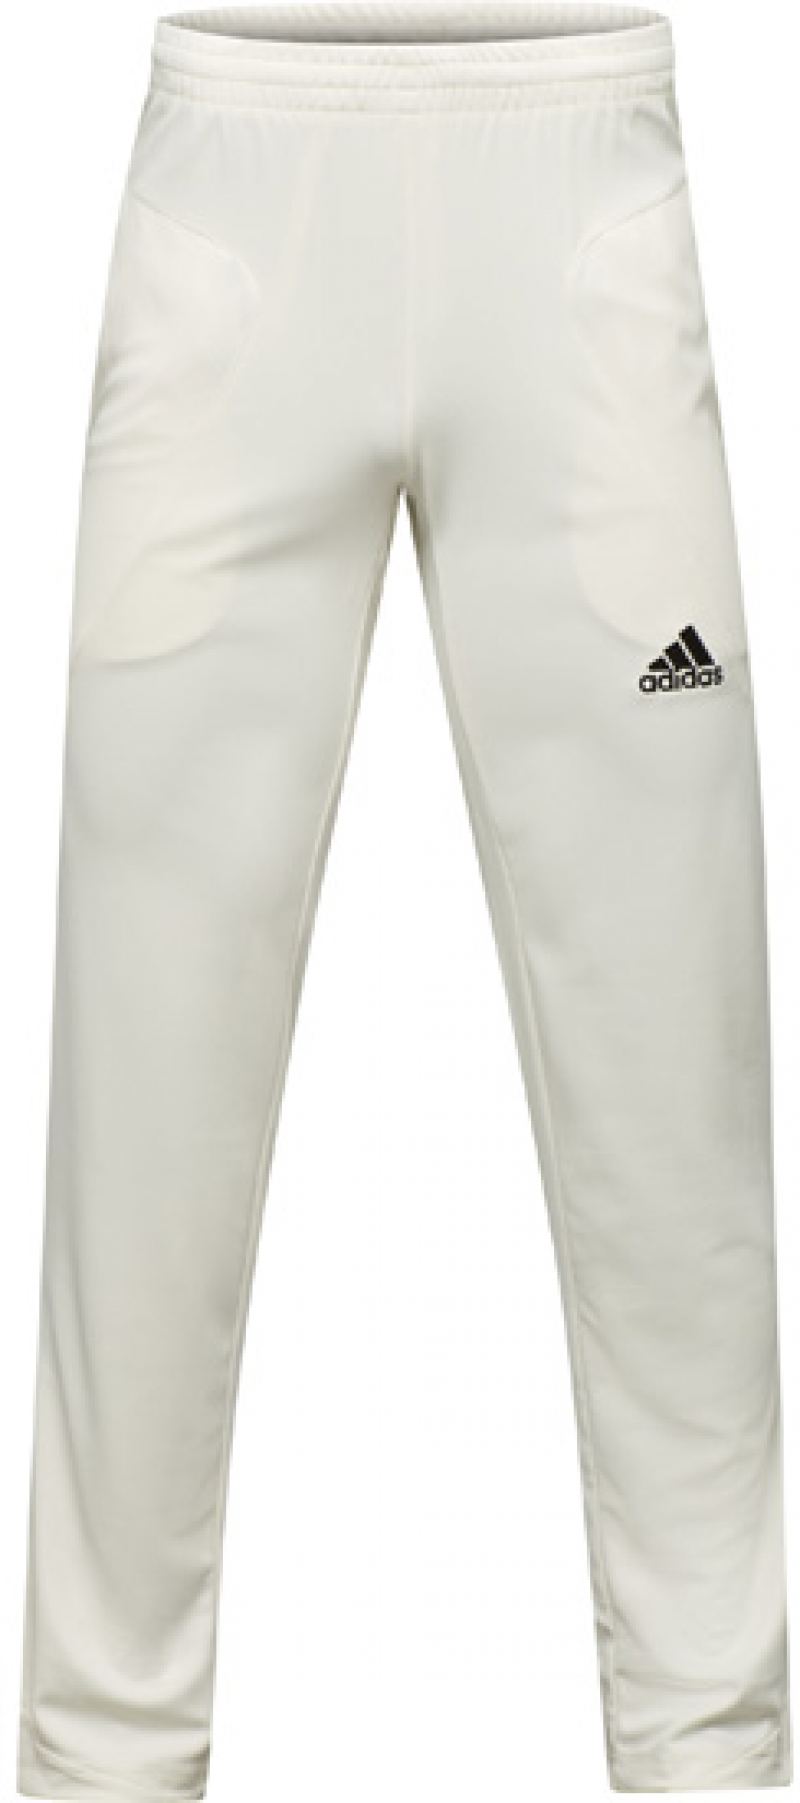 adidas mens cricket trousers